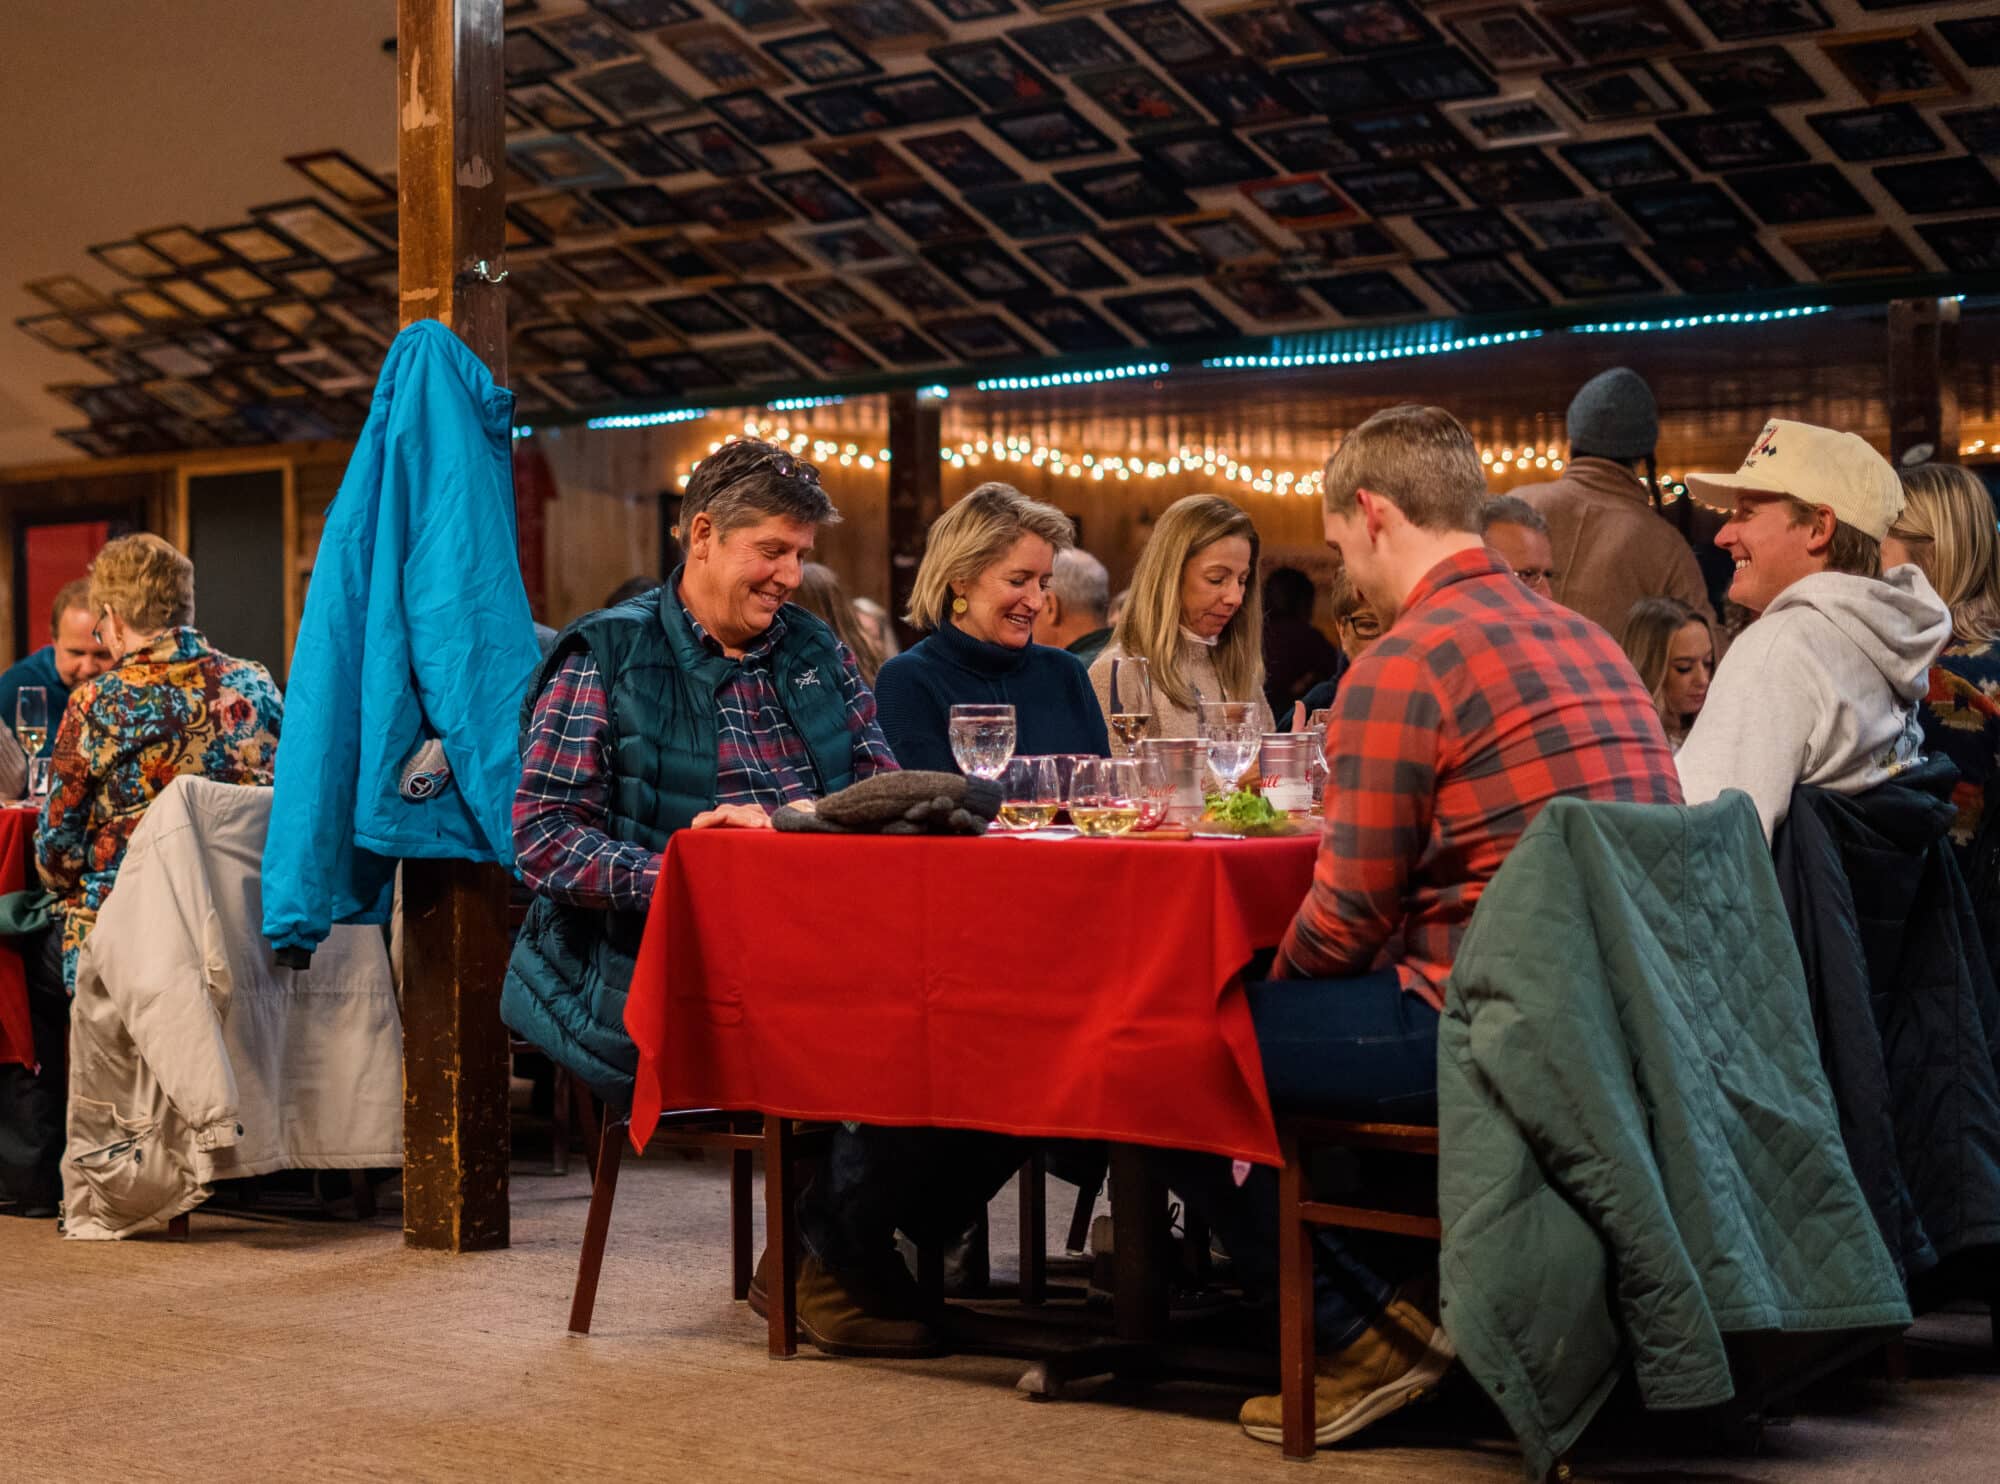 Guests enjoying a handcrafted meal at Powderhouse